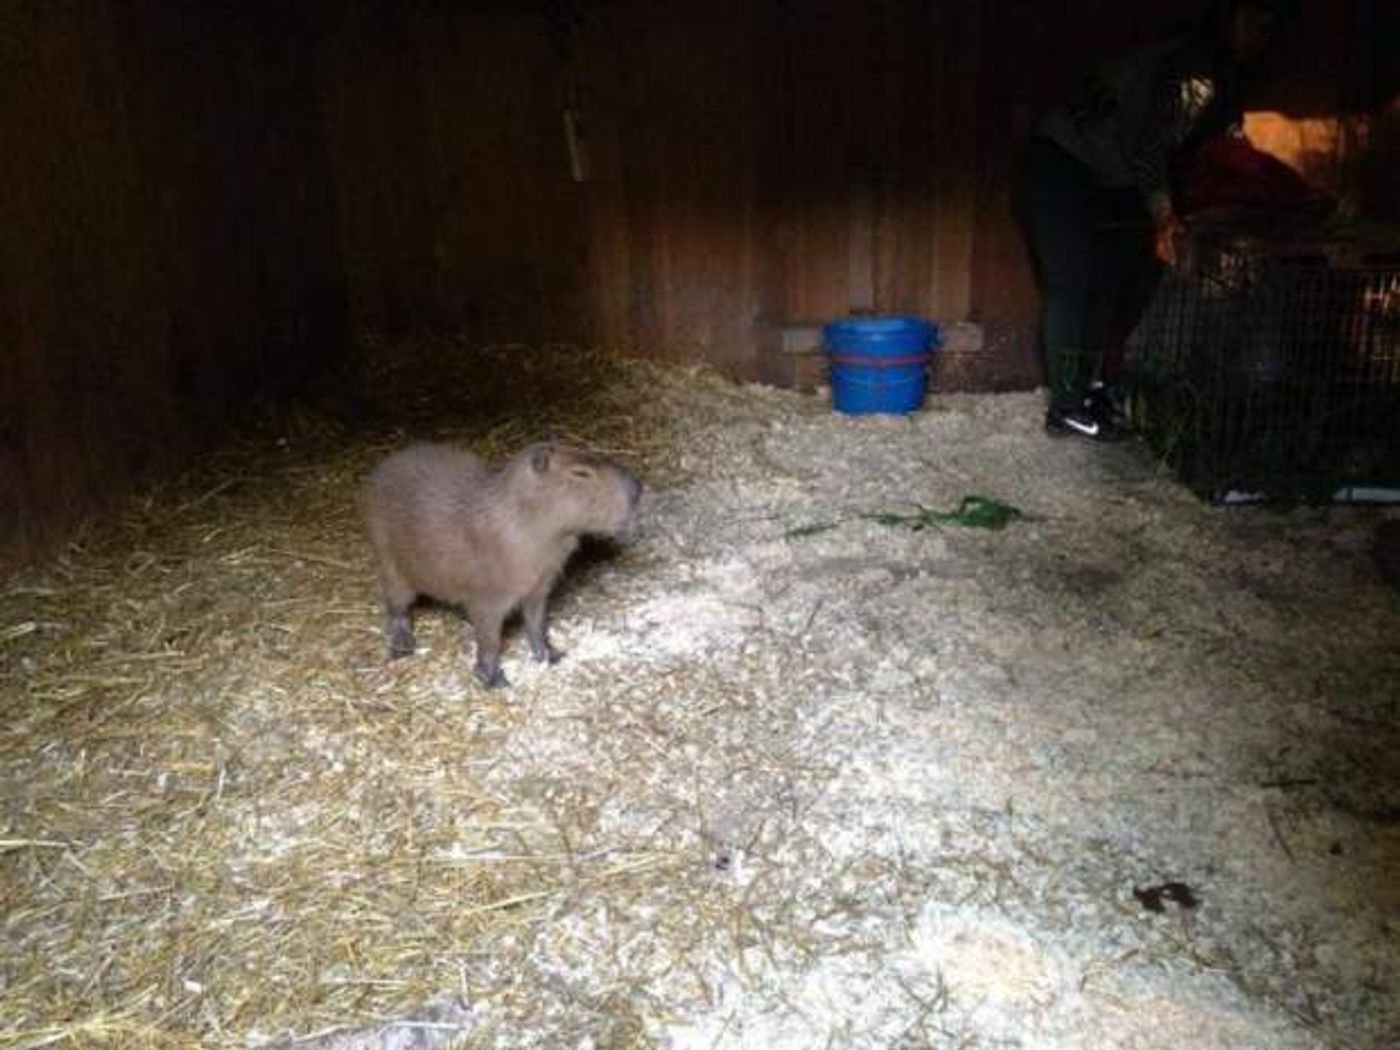 Pictured is the one capybara that was successfully captured. One still remains at large in the park somewhere and is being tracked for recovery.